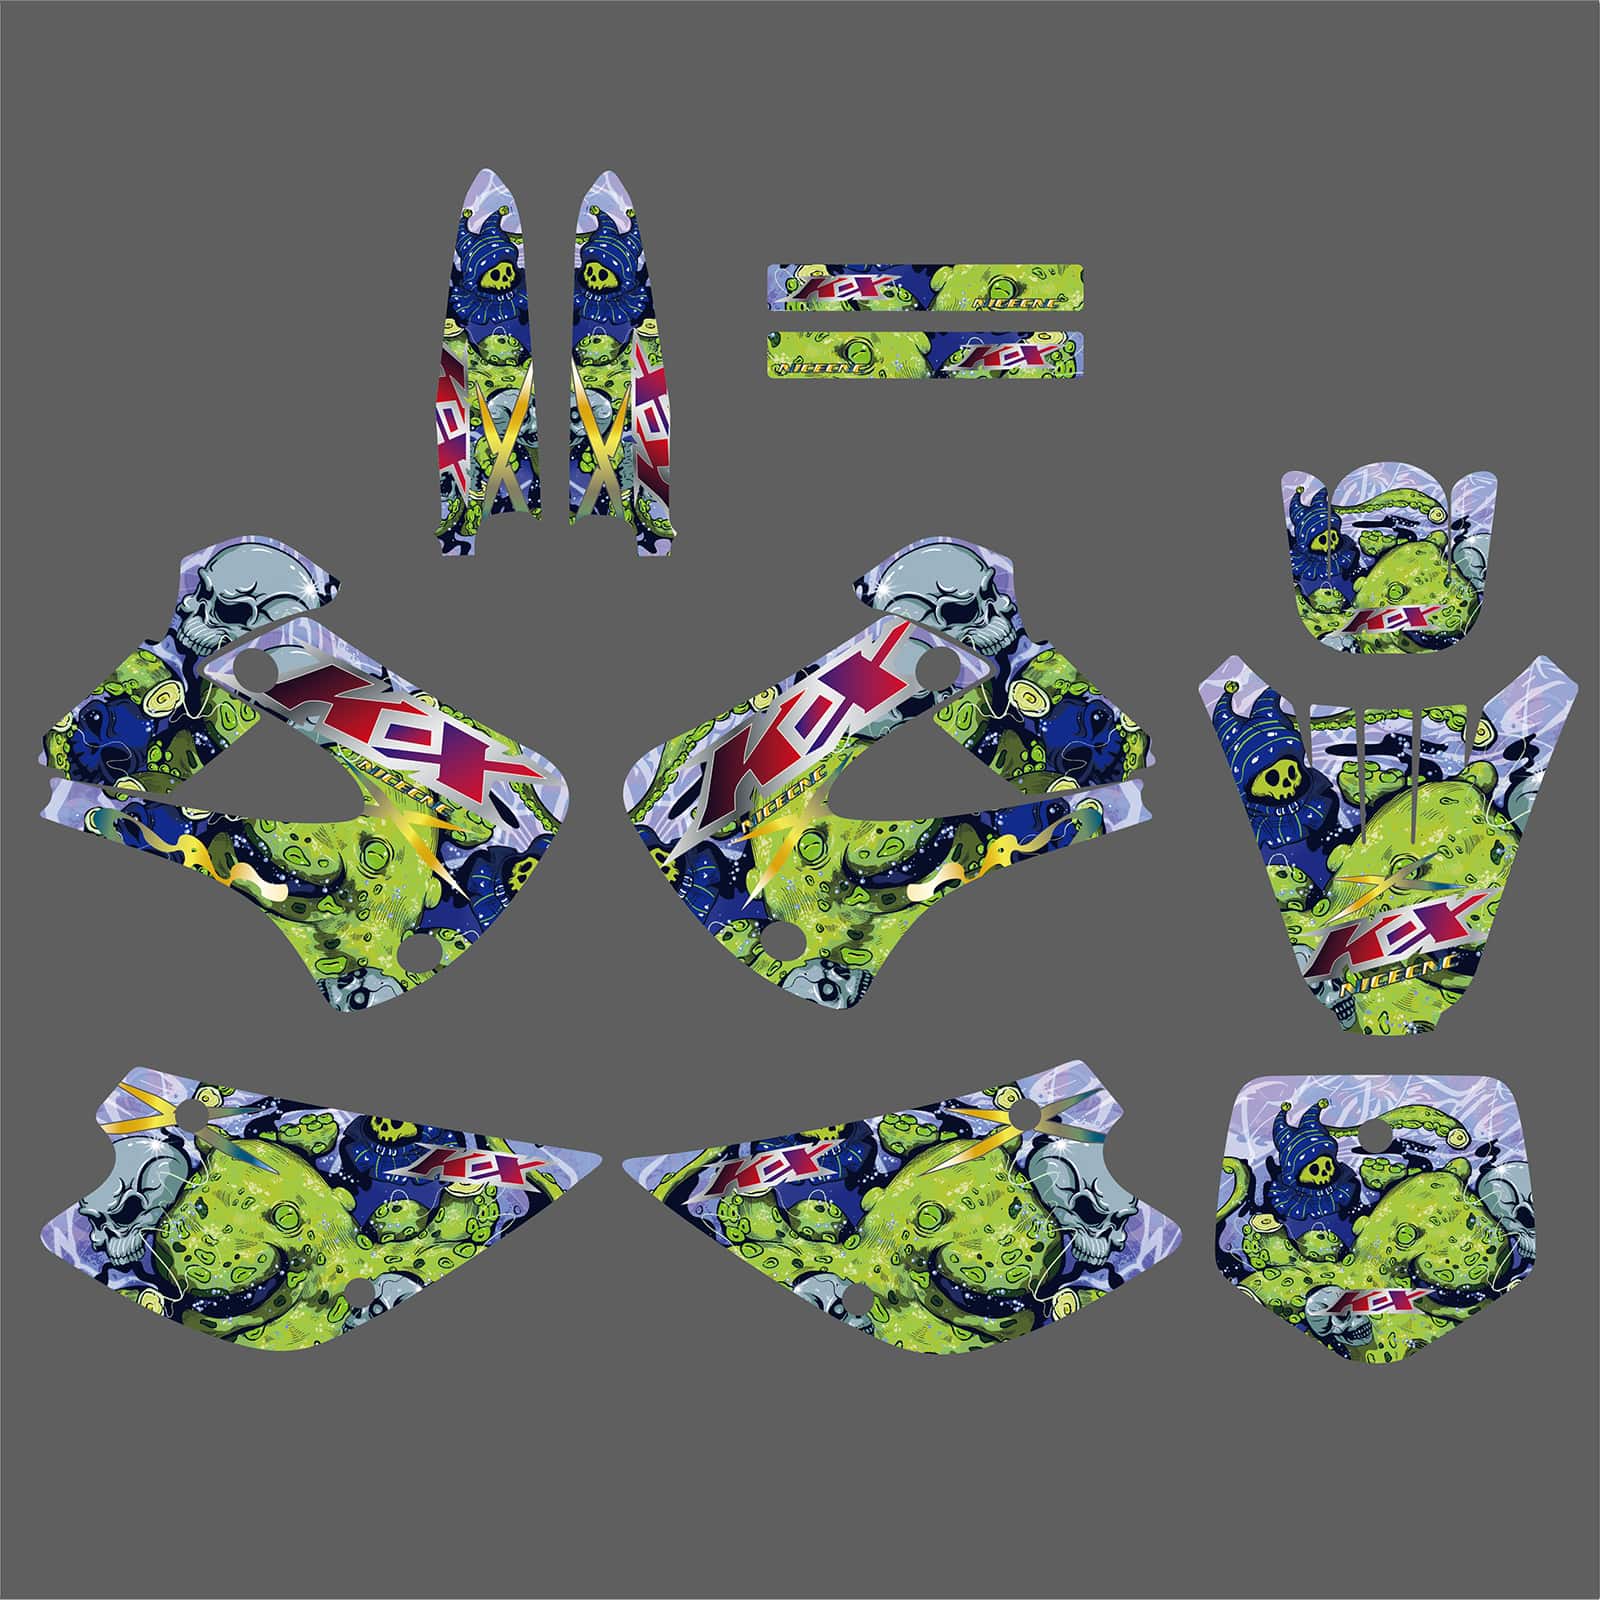 Motorcycle Team Full Graphics Background Sticker Decal Kits For KAWASAKI KX85/KX100 2001-2013